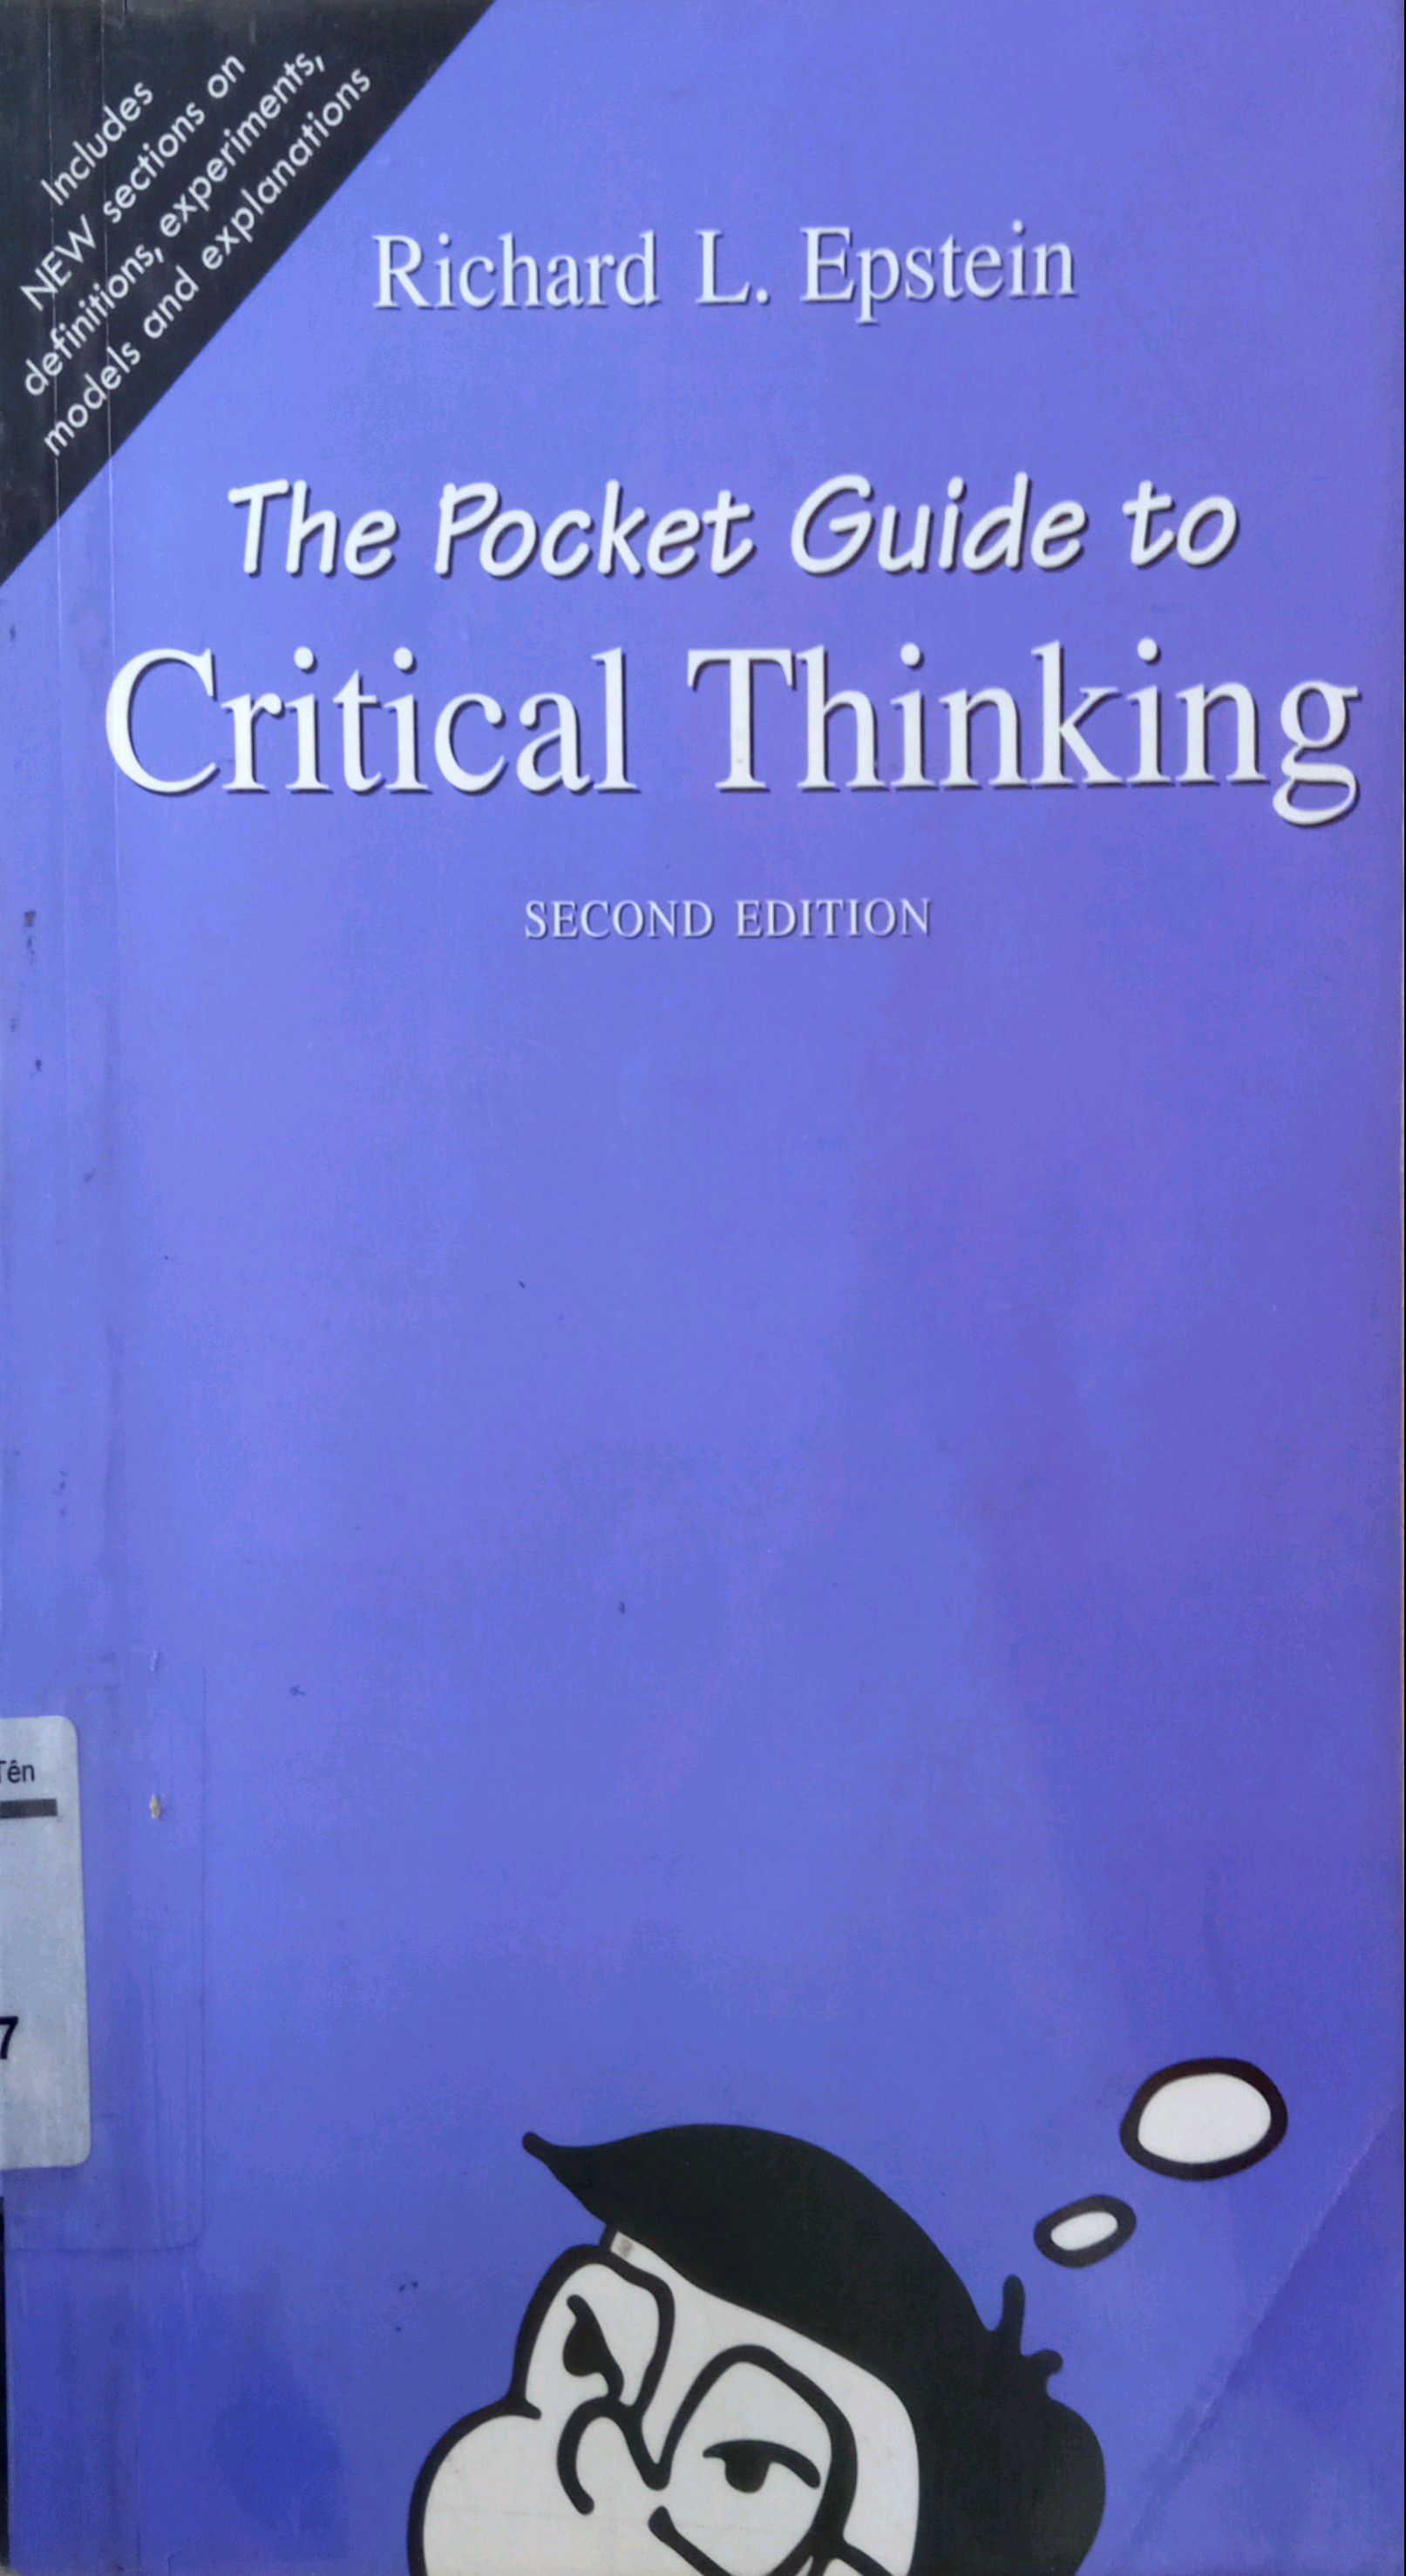 THE POCKET GUIDE TO CRITICAL THINKING